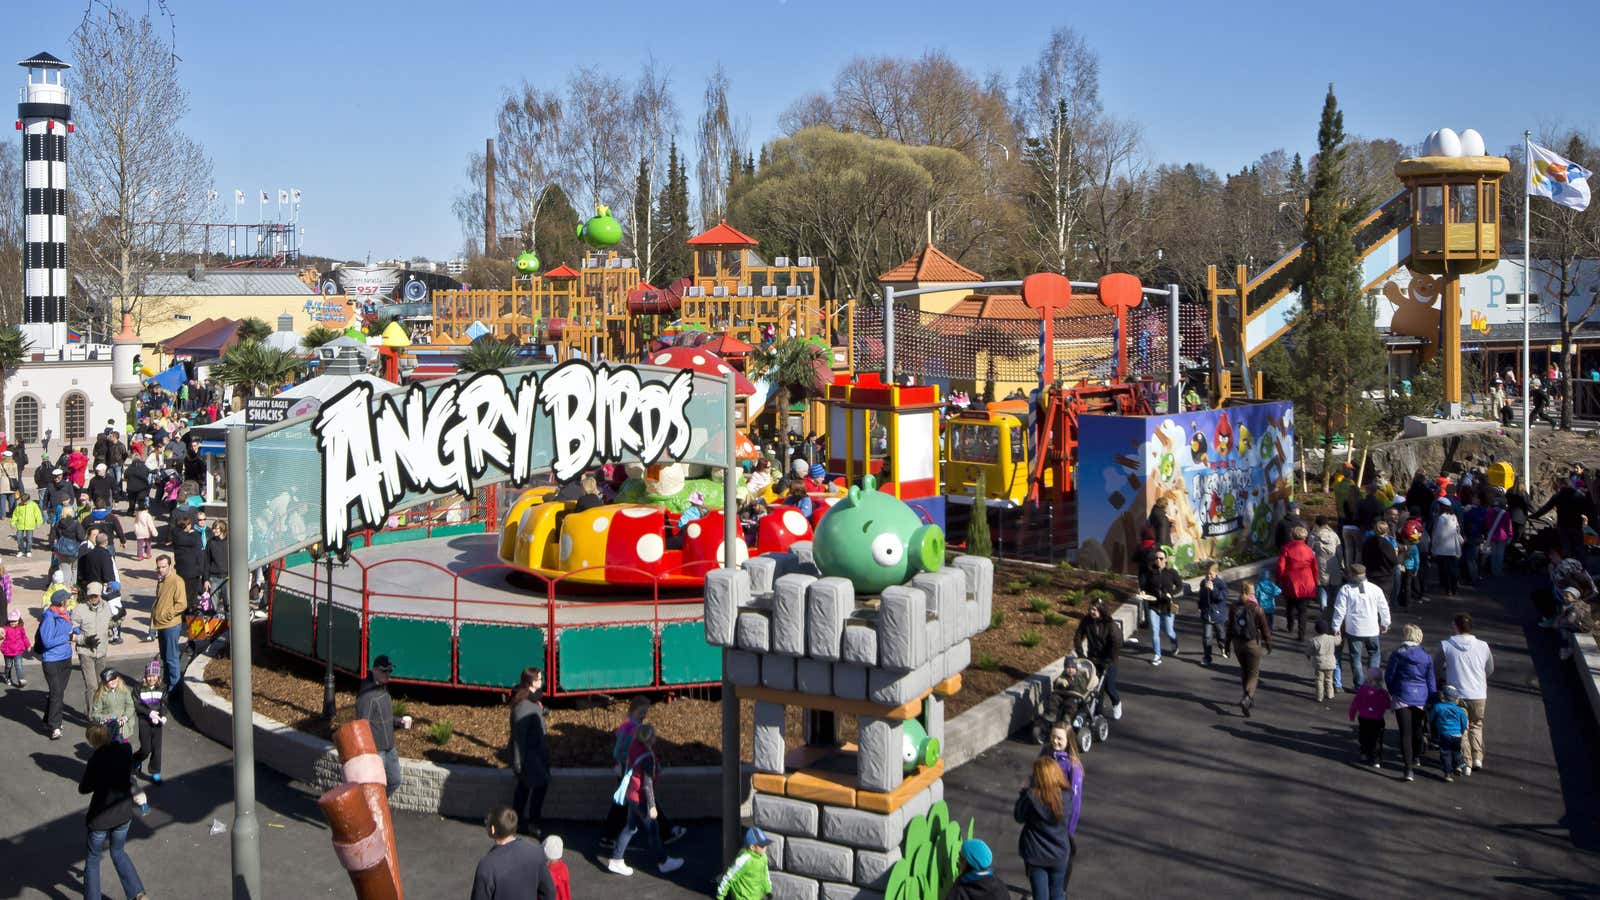 The Angry Birds franchise includes a theme park  in Finland.